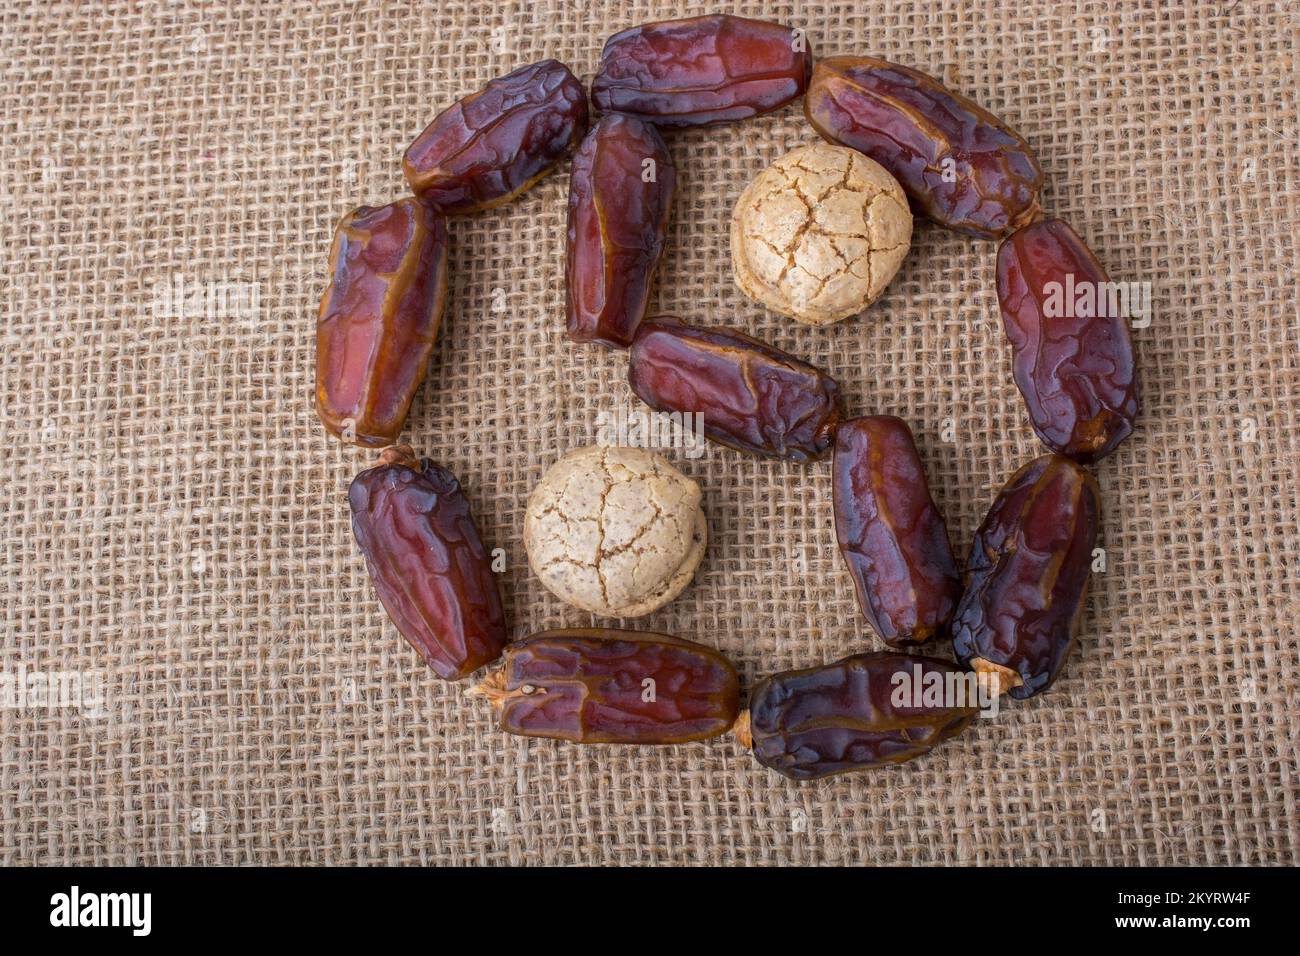 Date fruit form a Ying-yang as icon of harmony and balance Stock Photo